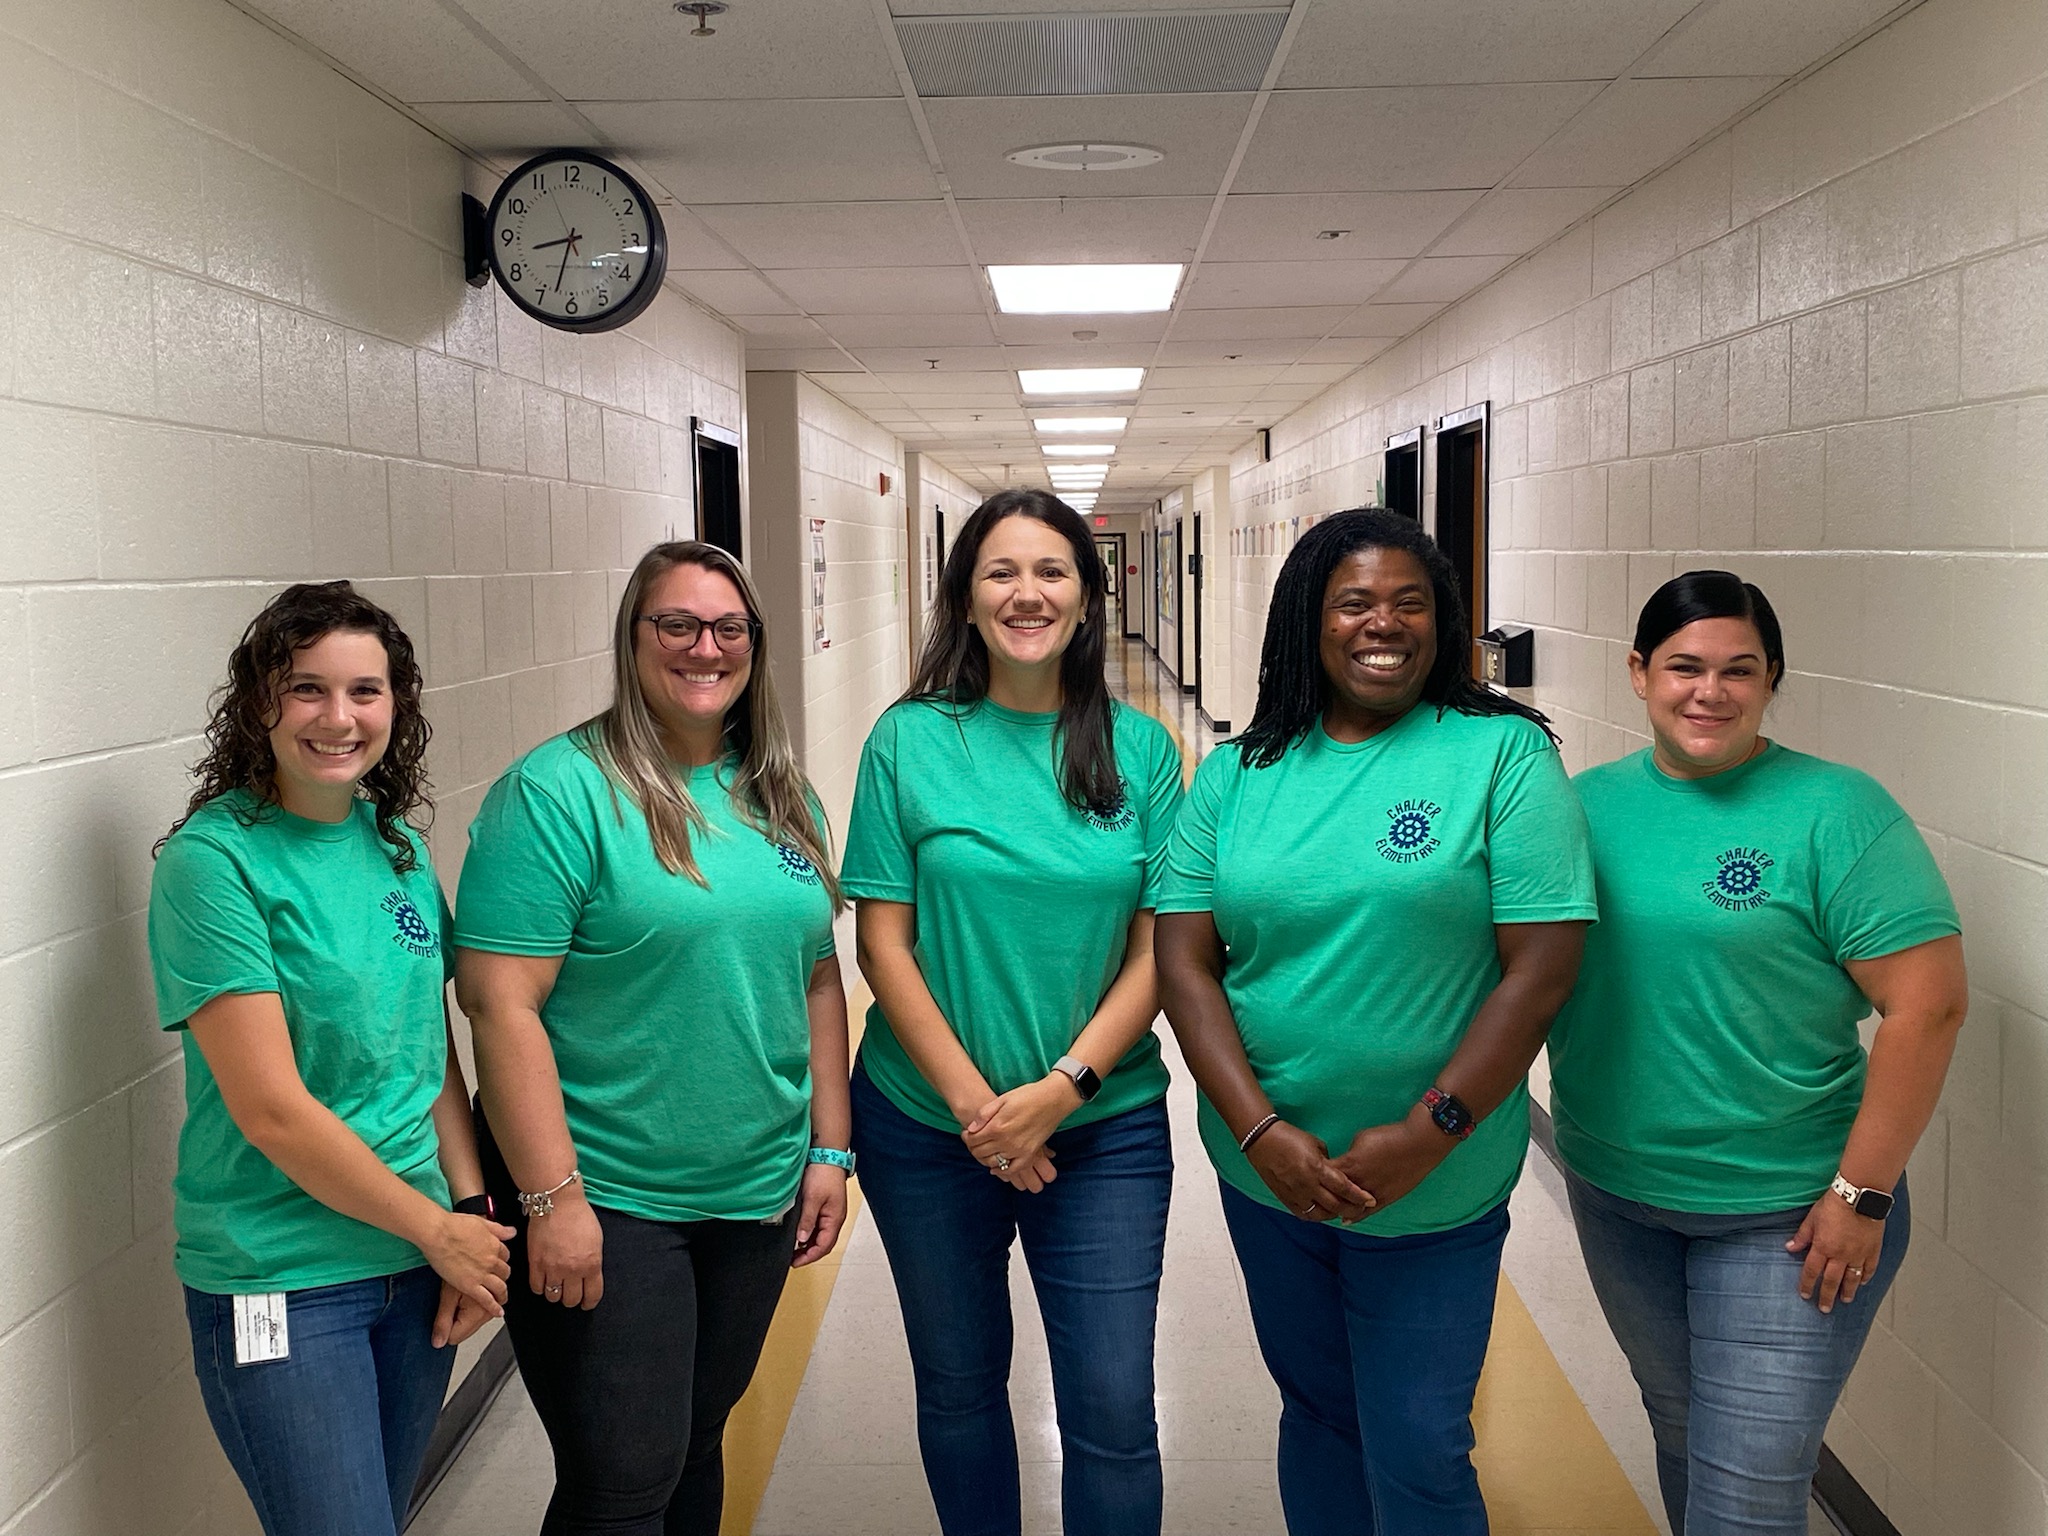 Chalker fourth grade teachers lined up for picture